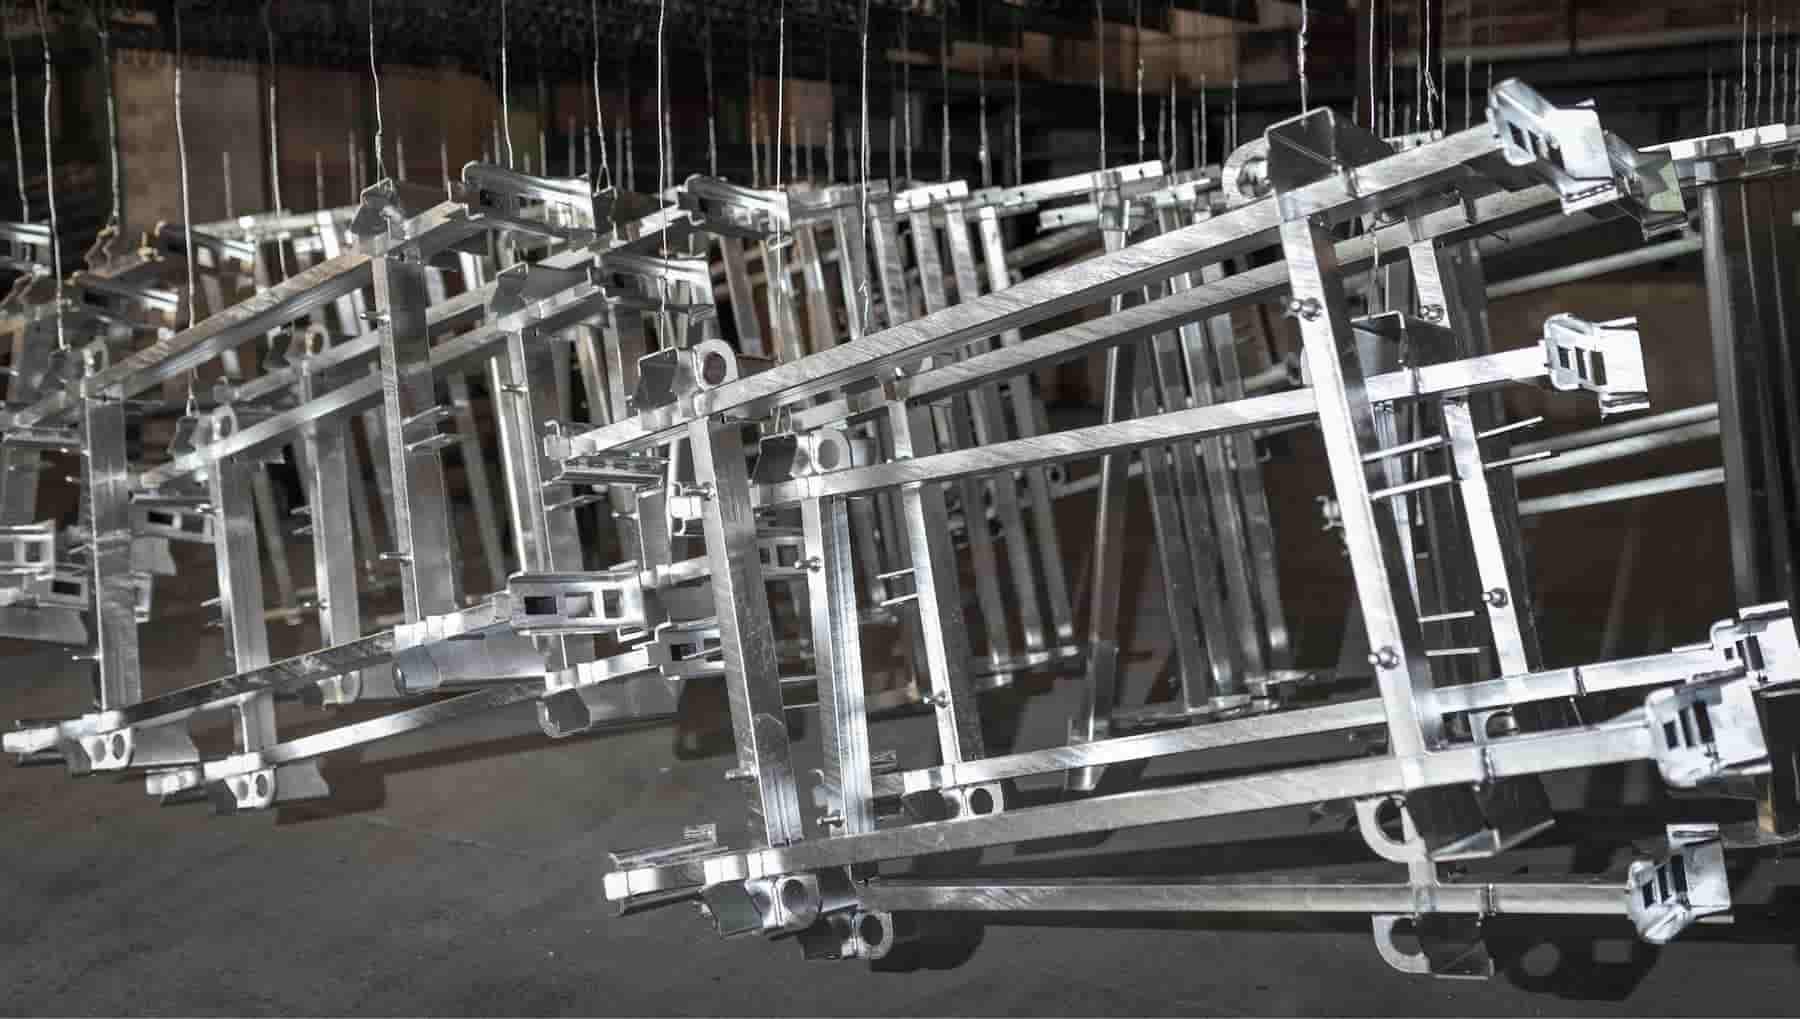 Aluminum parts being prepared for coating